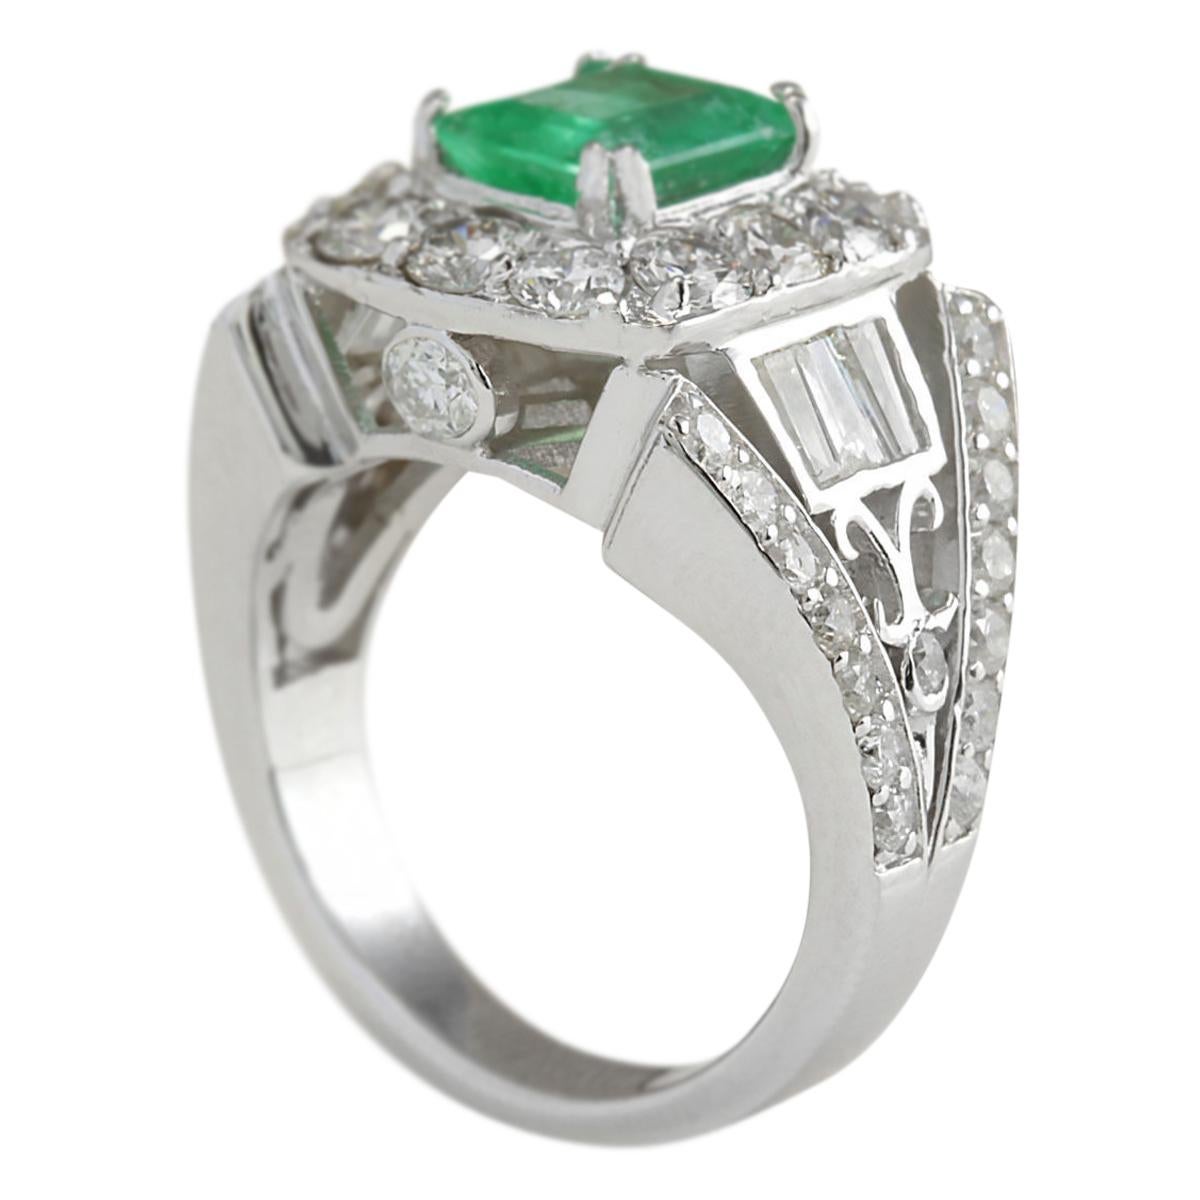 4.75 Carat Emerald 18 Karat White Gold Diamond Ring In New Condition For Sale In Los Angeles, CA